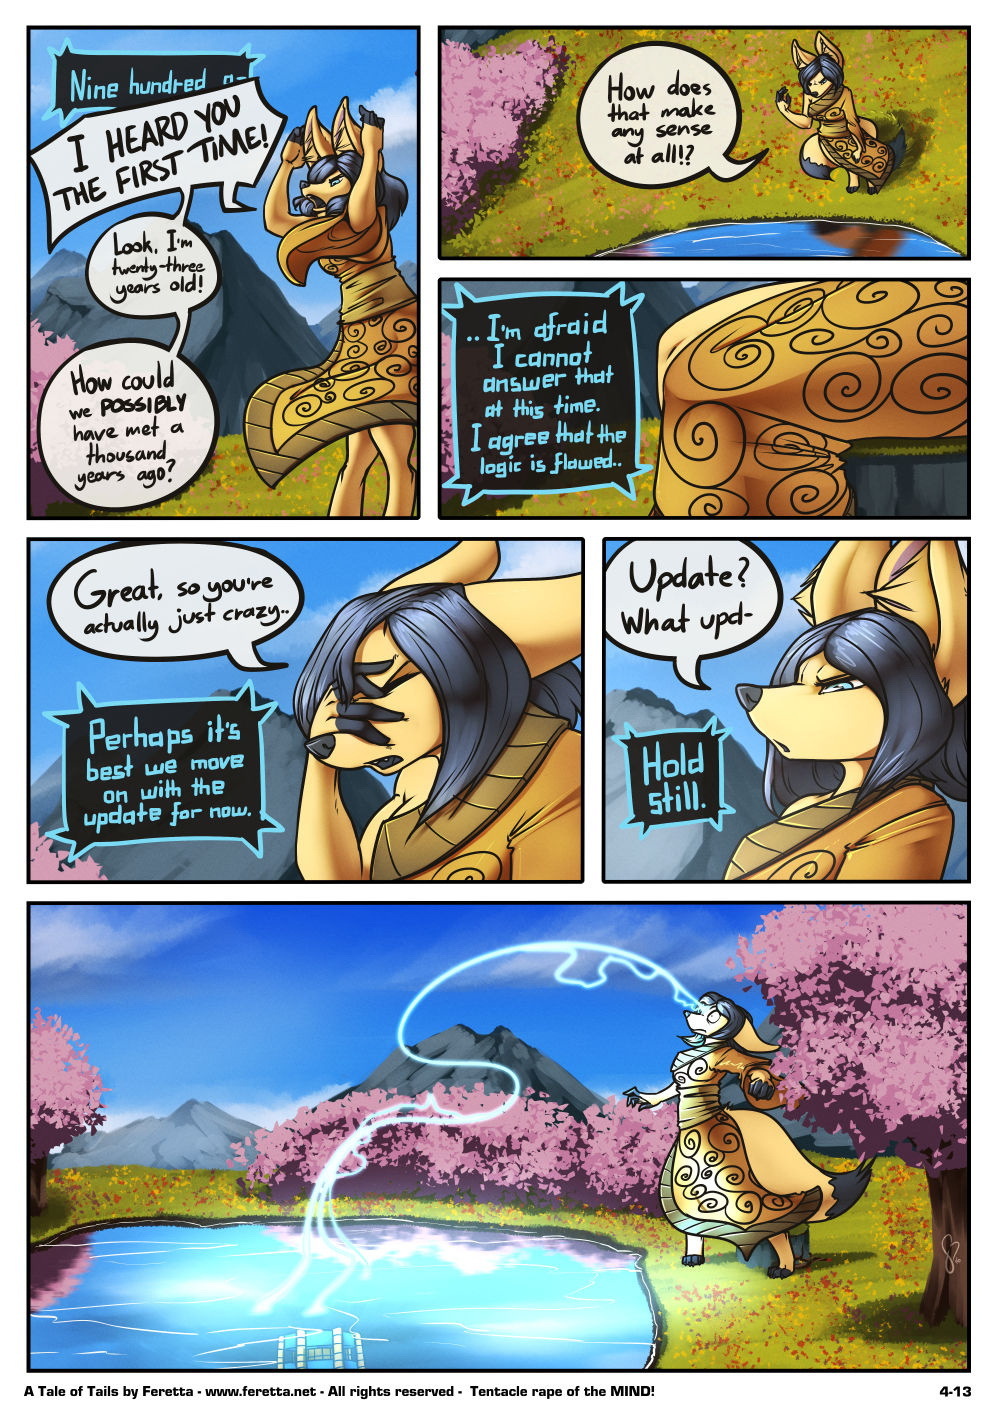 A Tale of Tails 4 - Matters of the mind - Page 13